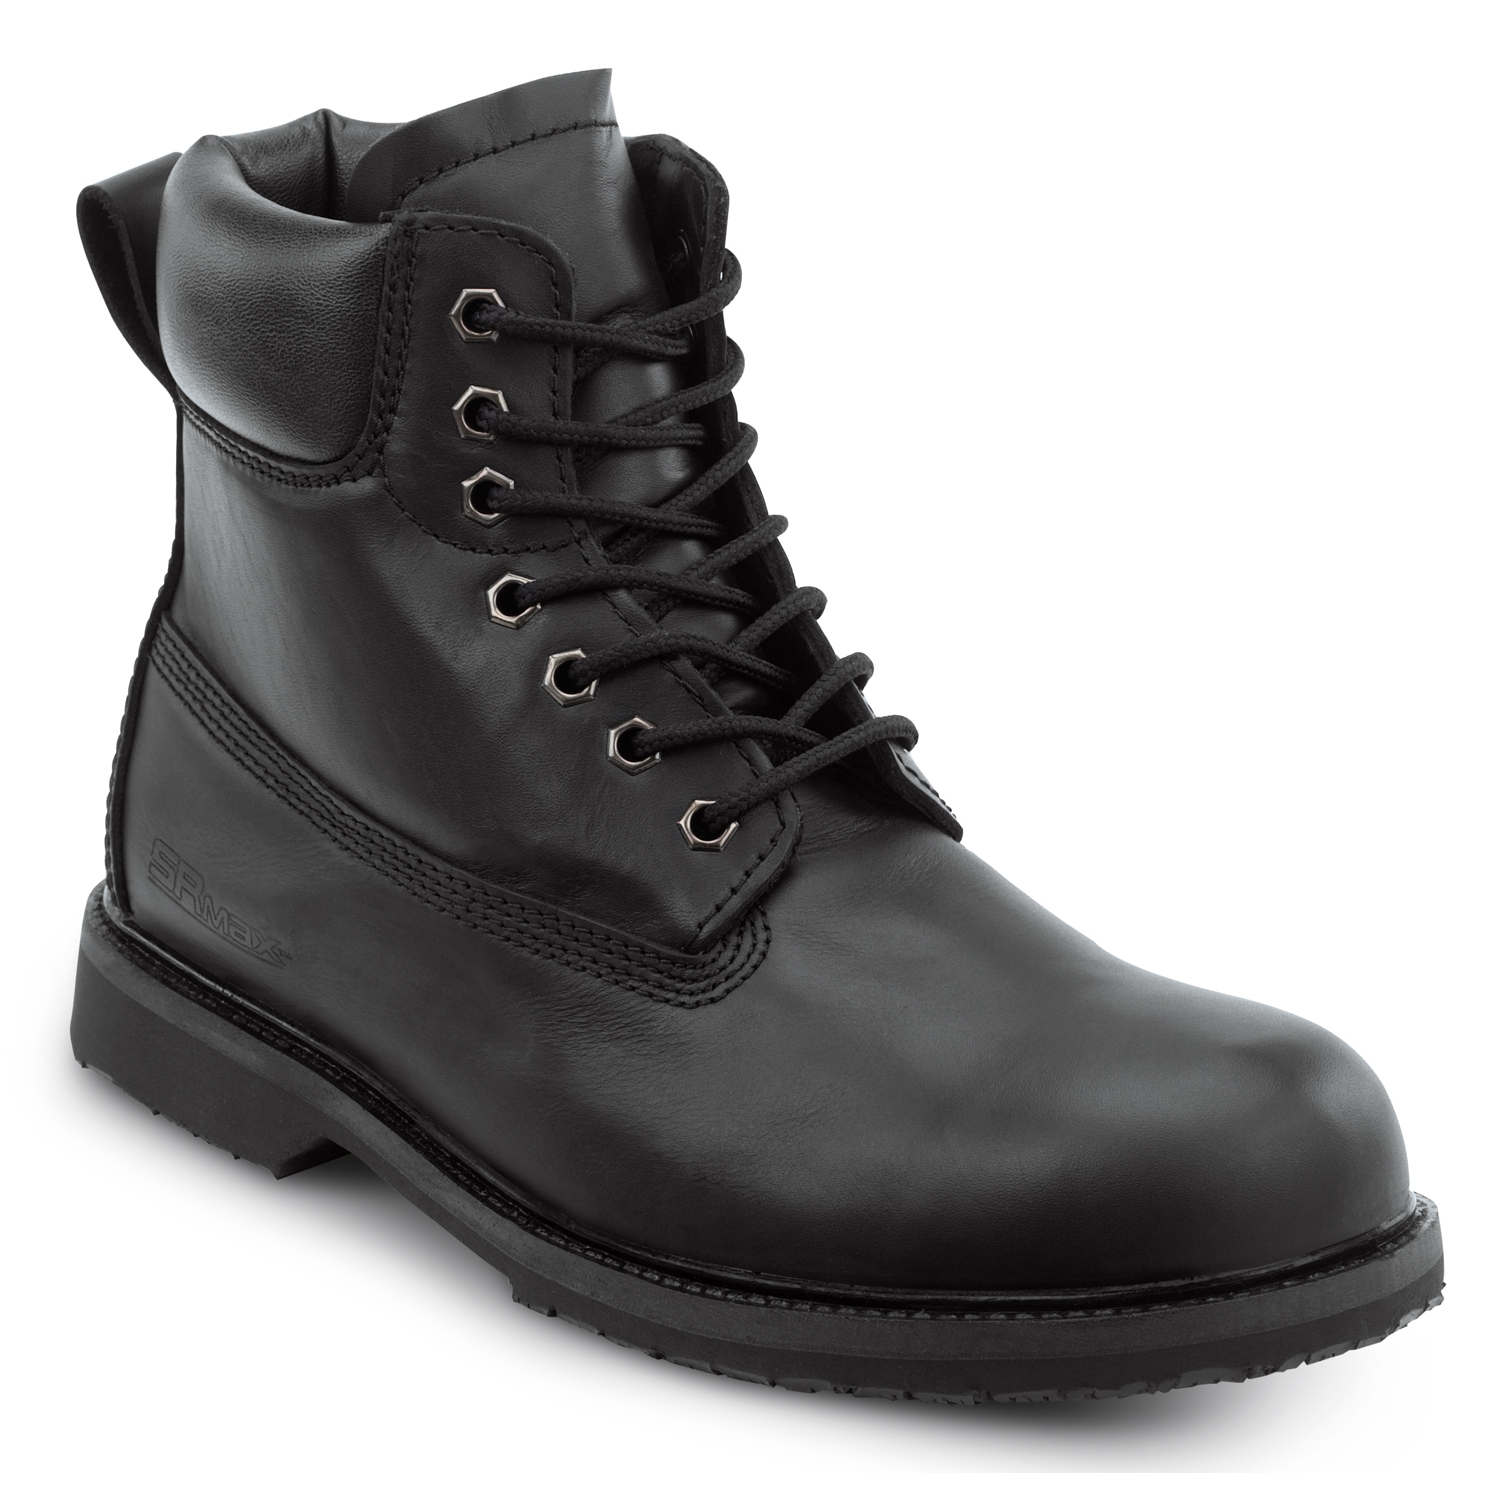 Mens Viking Black Lace Up Lightweight Casual Formal Work Boots Sizes 6.5-11 